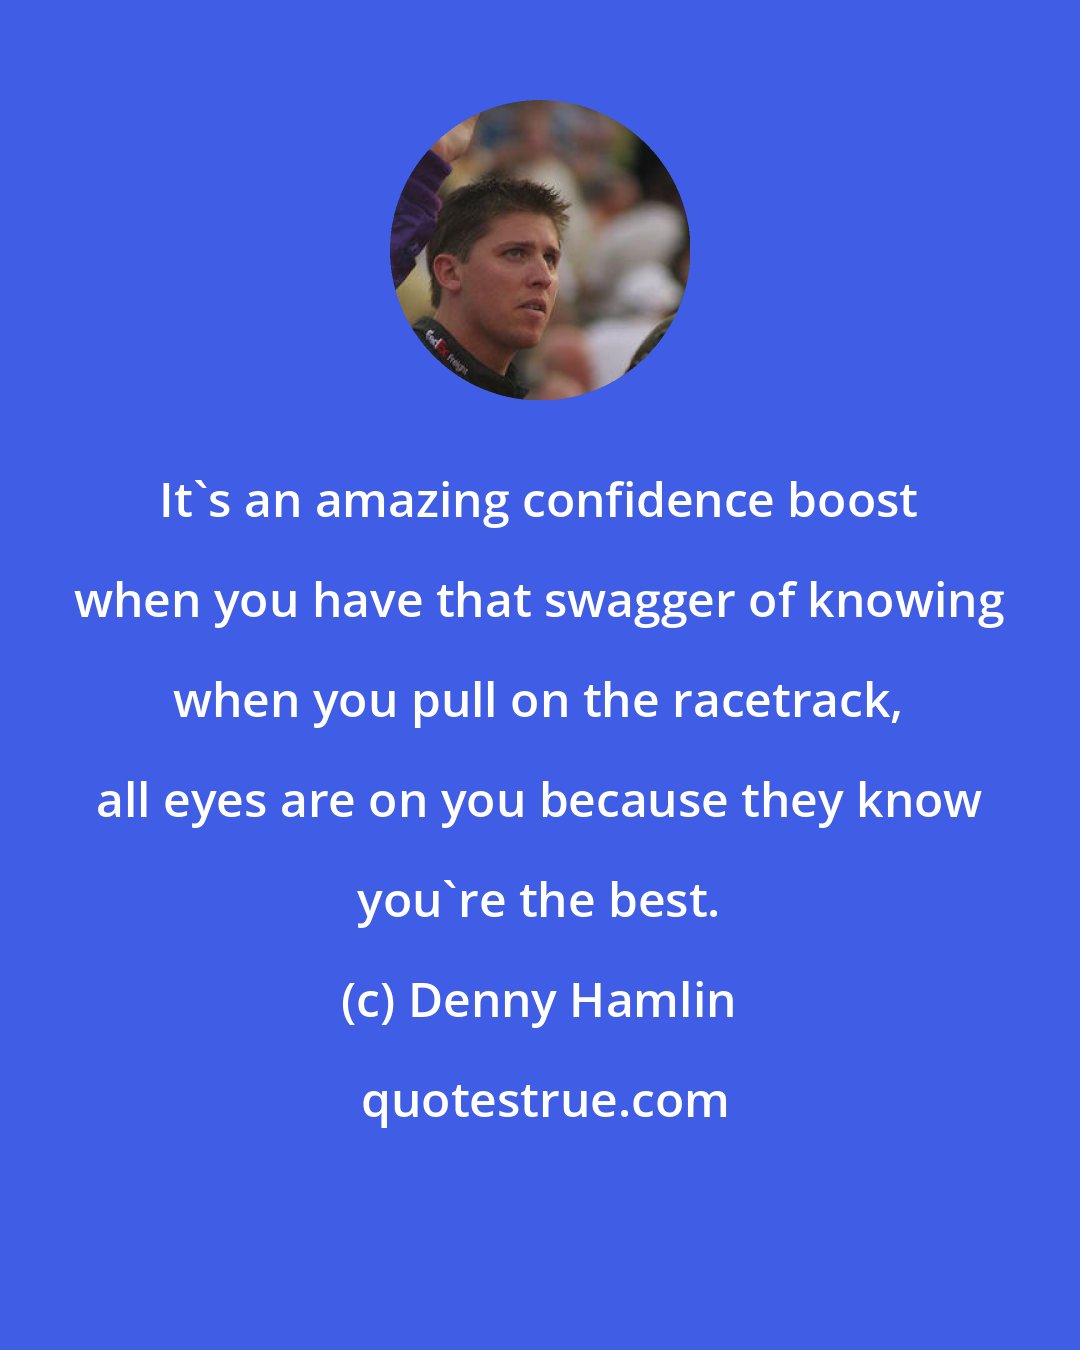 Denny Hamlin: It's an amazing confidence boost when you have that swagger of knowing when you pull on the racetrack, all eyes are on you because they know you're the best.